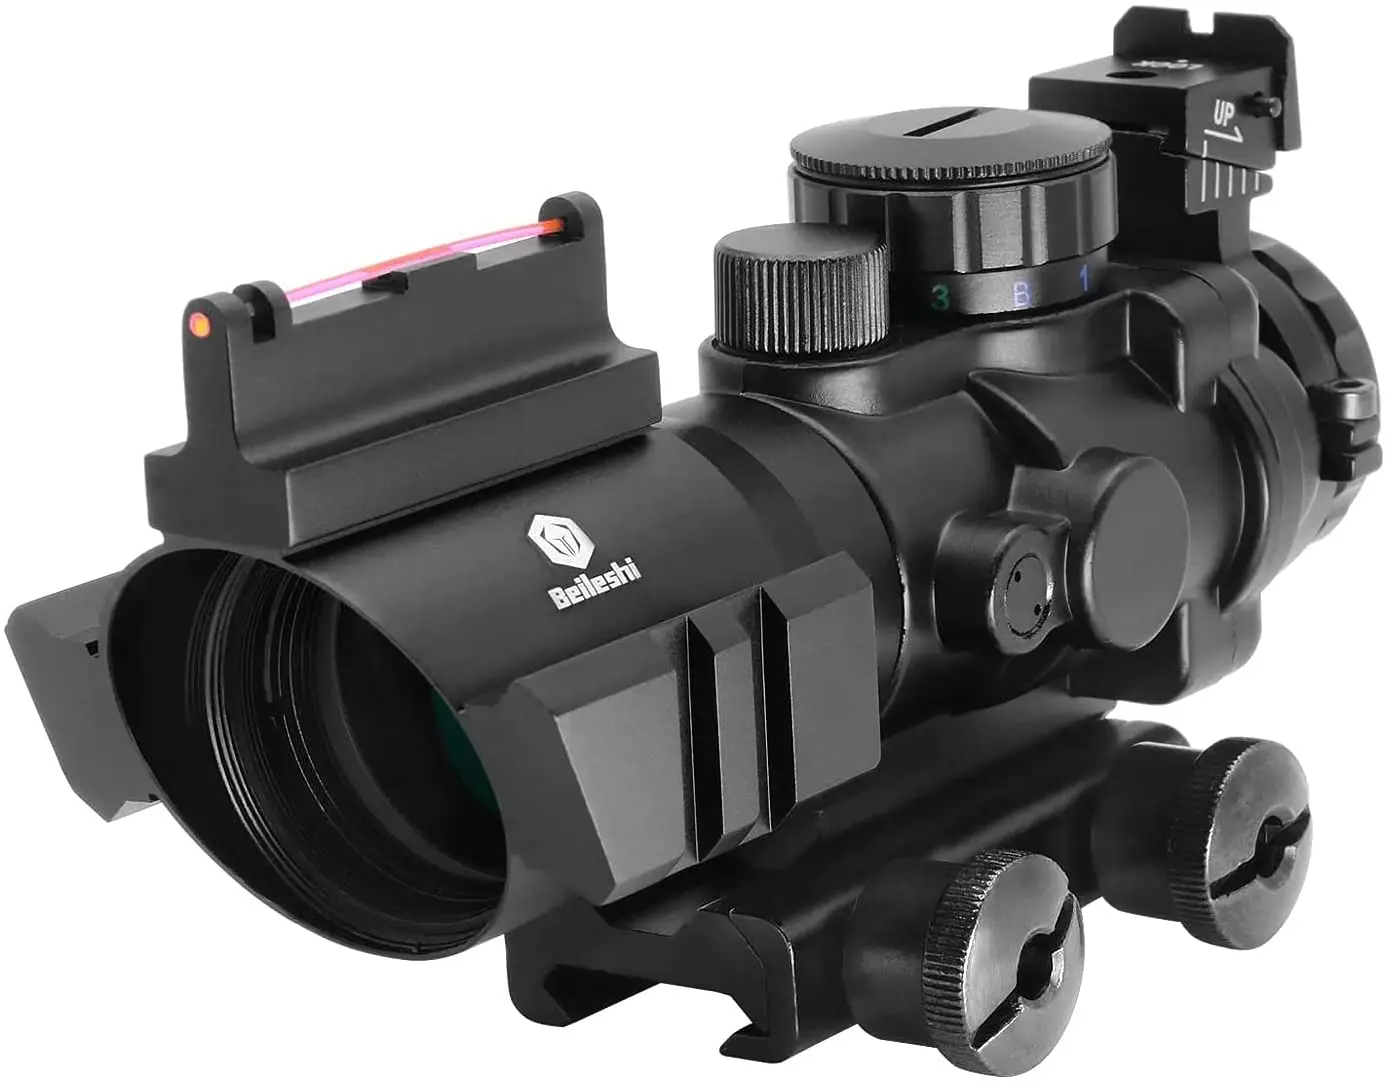 

4x32 Prism Rifle Scope Optic Sight Red Tactical Tri Acog Prismatic Blue, Red, Green Adjustable Range